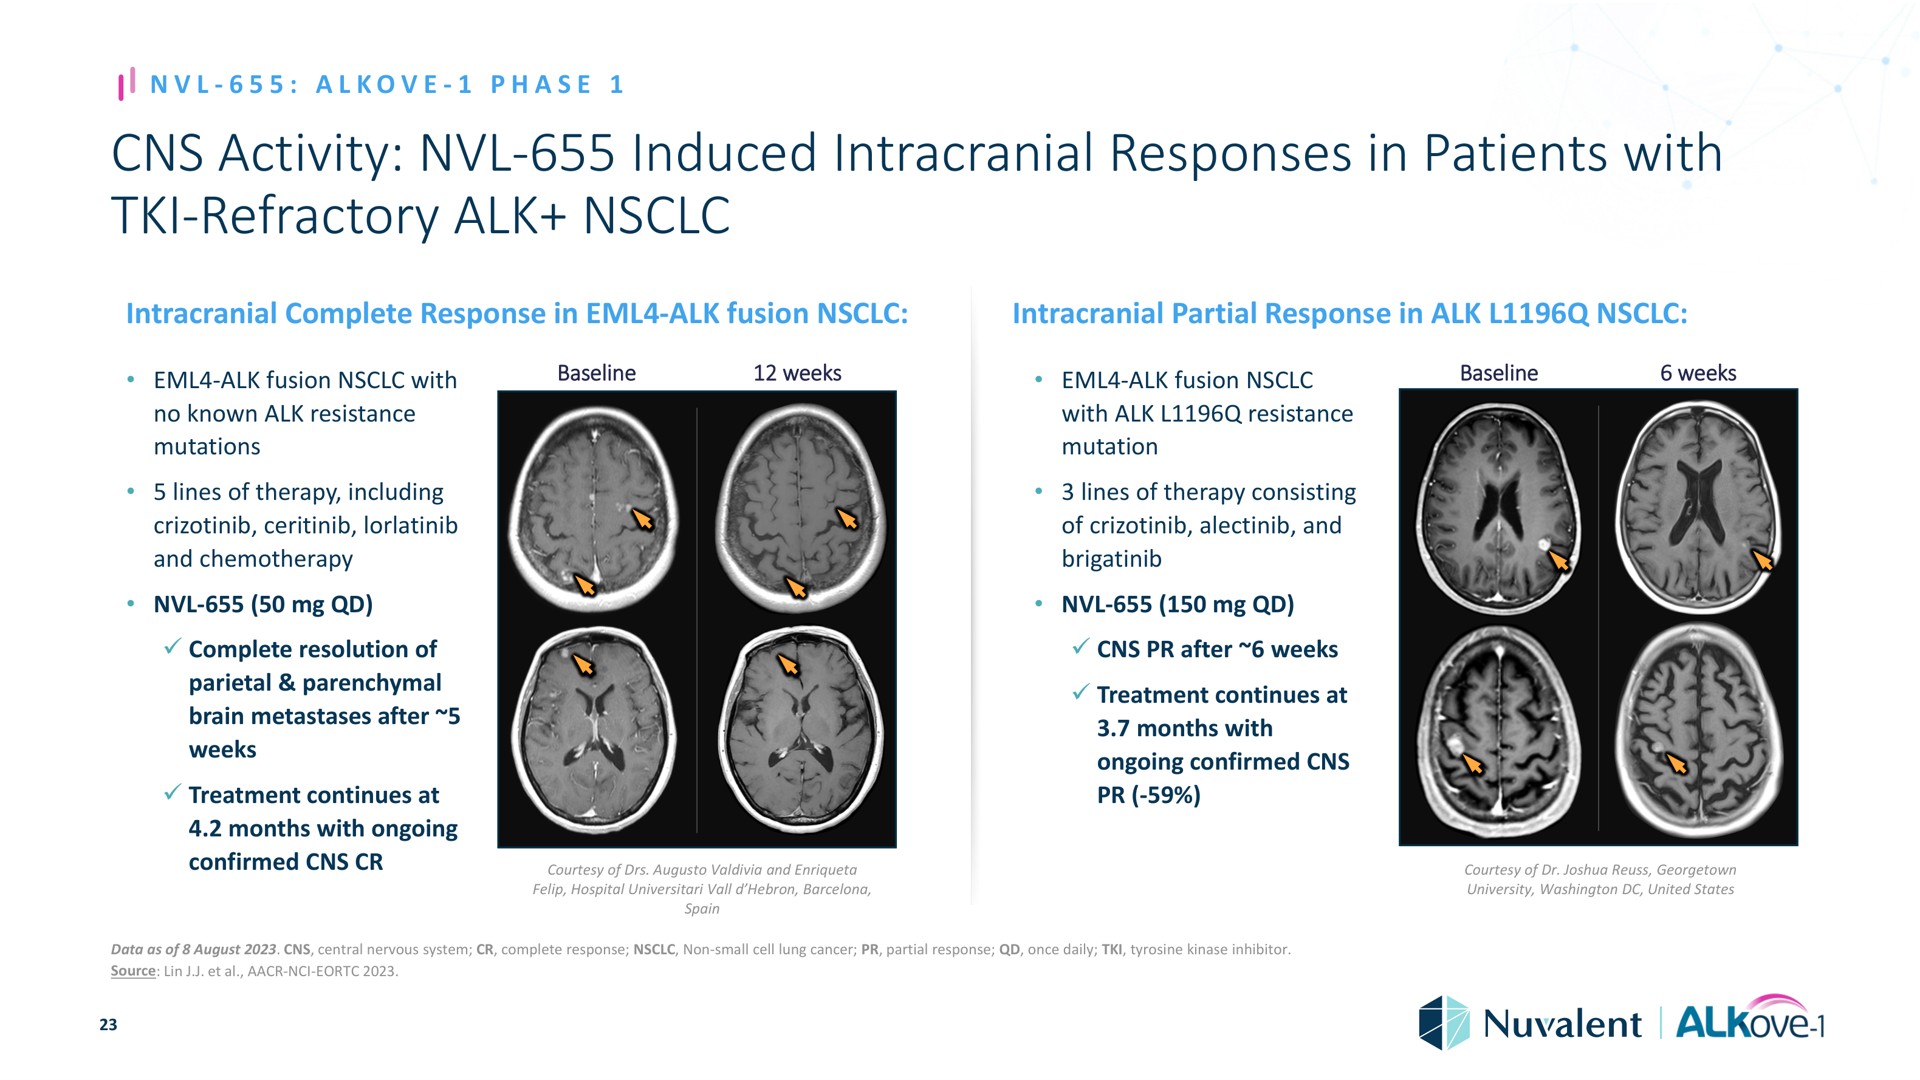 activity induced intracranial responses in patients with refractory alk phase refractory complete response alk fusion partial response alk fusion no known resistance mutations lines of therapy including and chemotherapy complete resolution of parietal parenchymal brain metastases after weeks treatment continues at months ongoing confirmed weeks weeks alk fusion resistance mutation lines of therapy consisting of and after weeks treatment continues at months ongoing confirmed courtesy of and hospital vall barcelona courtesy of university united states data as of august central nervous system complete response non small cell lung cancer partial response once daily tyrosine kinase inhibitor source lin i | Nuvalent